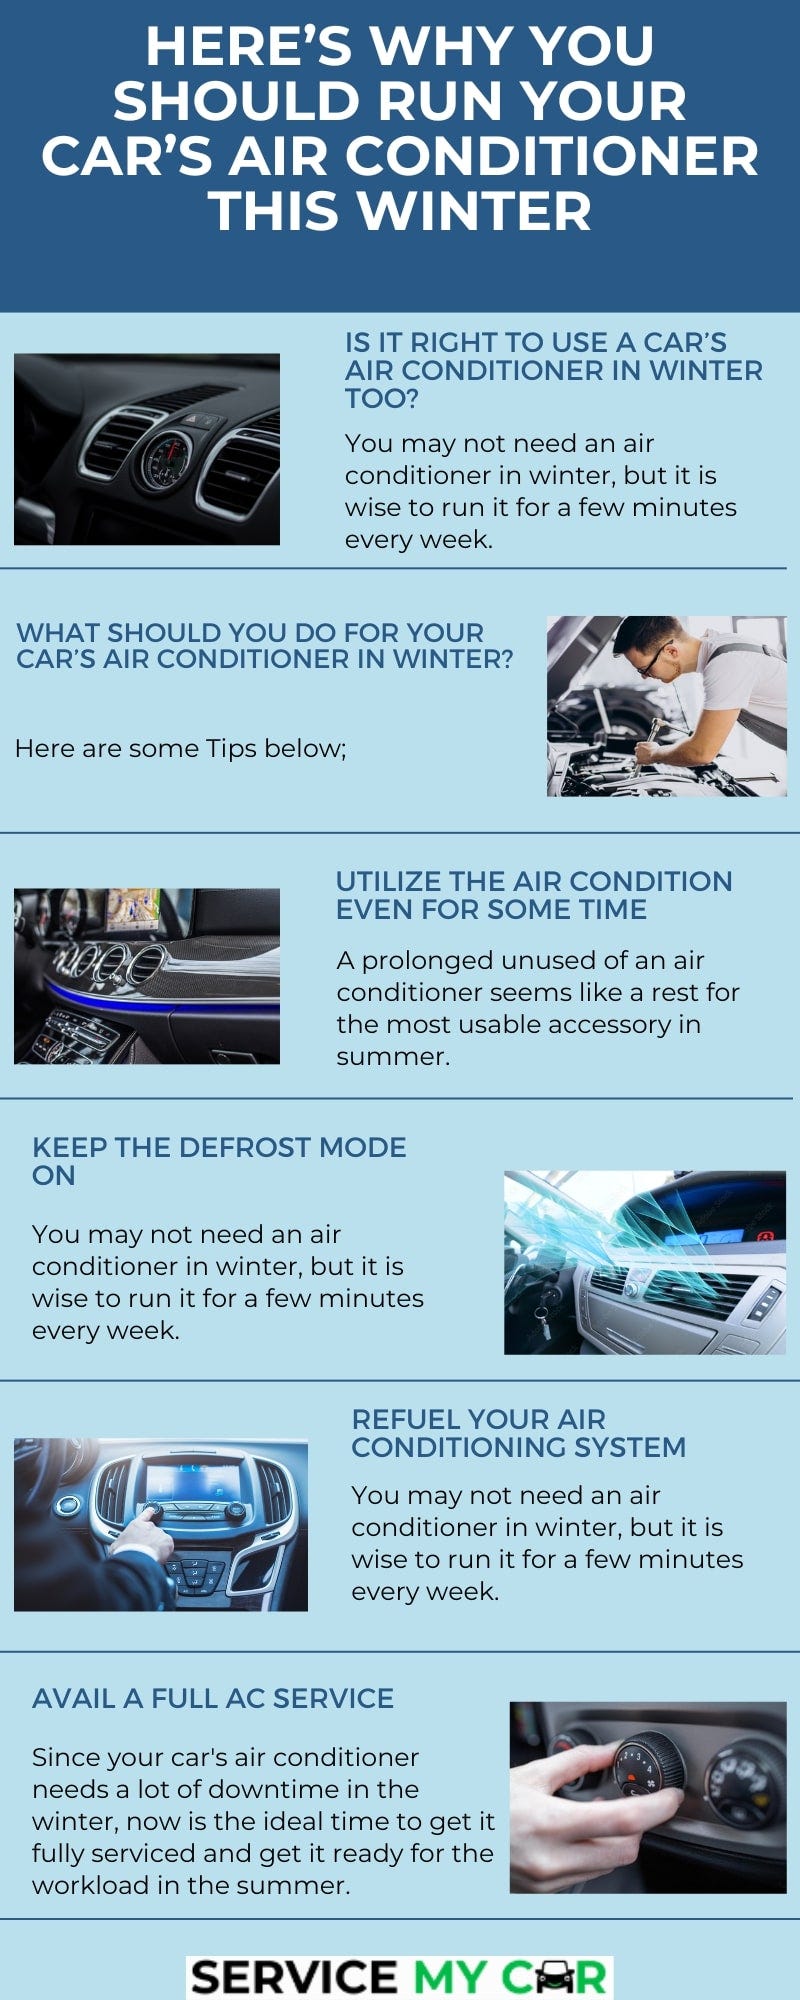 Here's why you should run Your Car's Air Conditioner This Winter